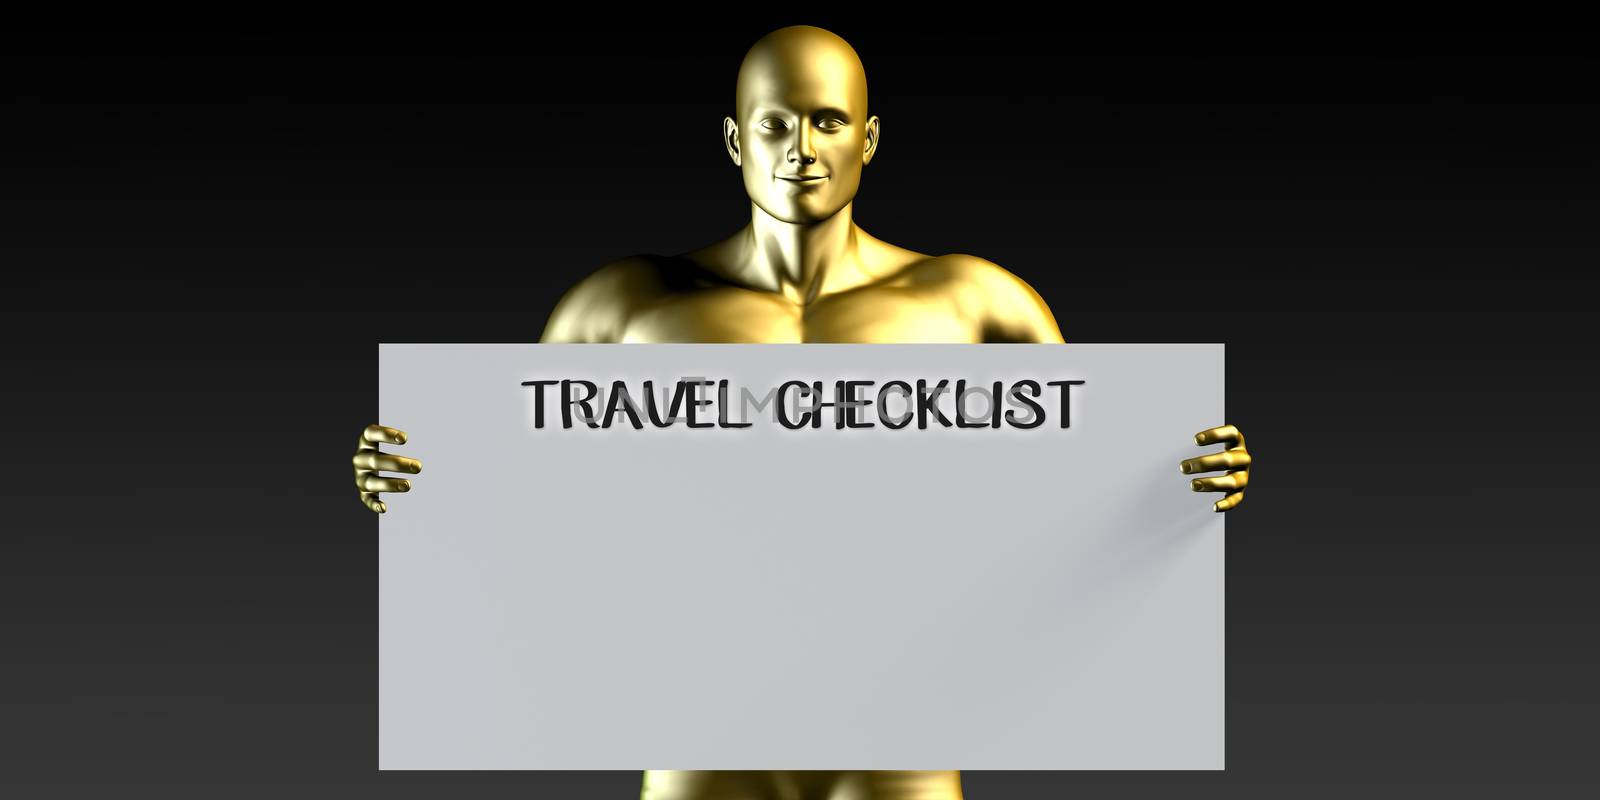 Travel Checklist with a Man Holding Placard Poster Template